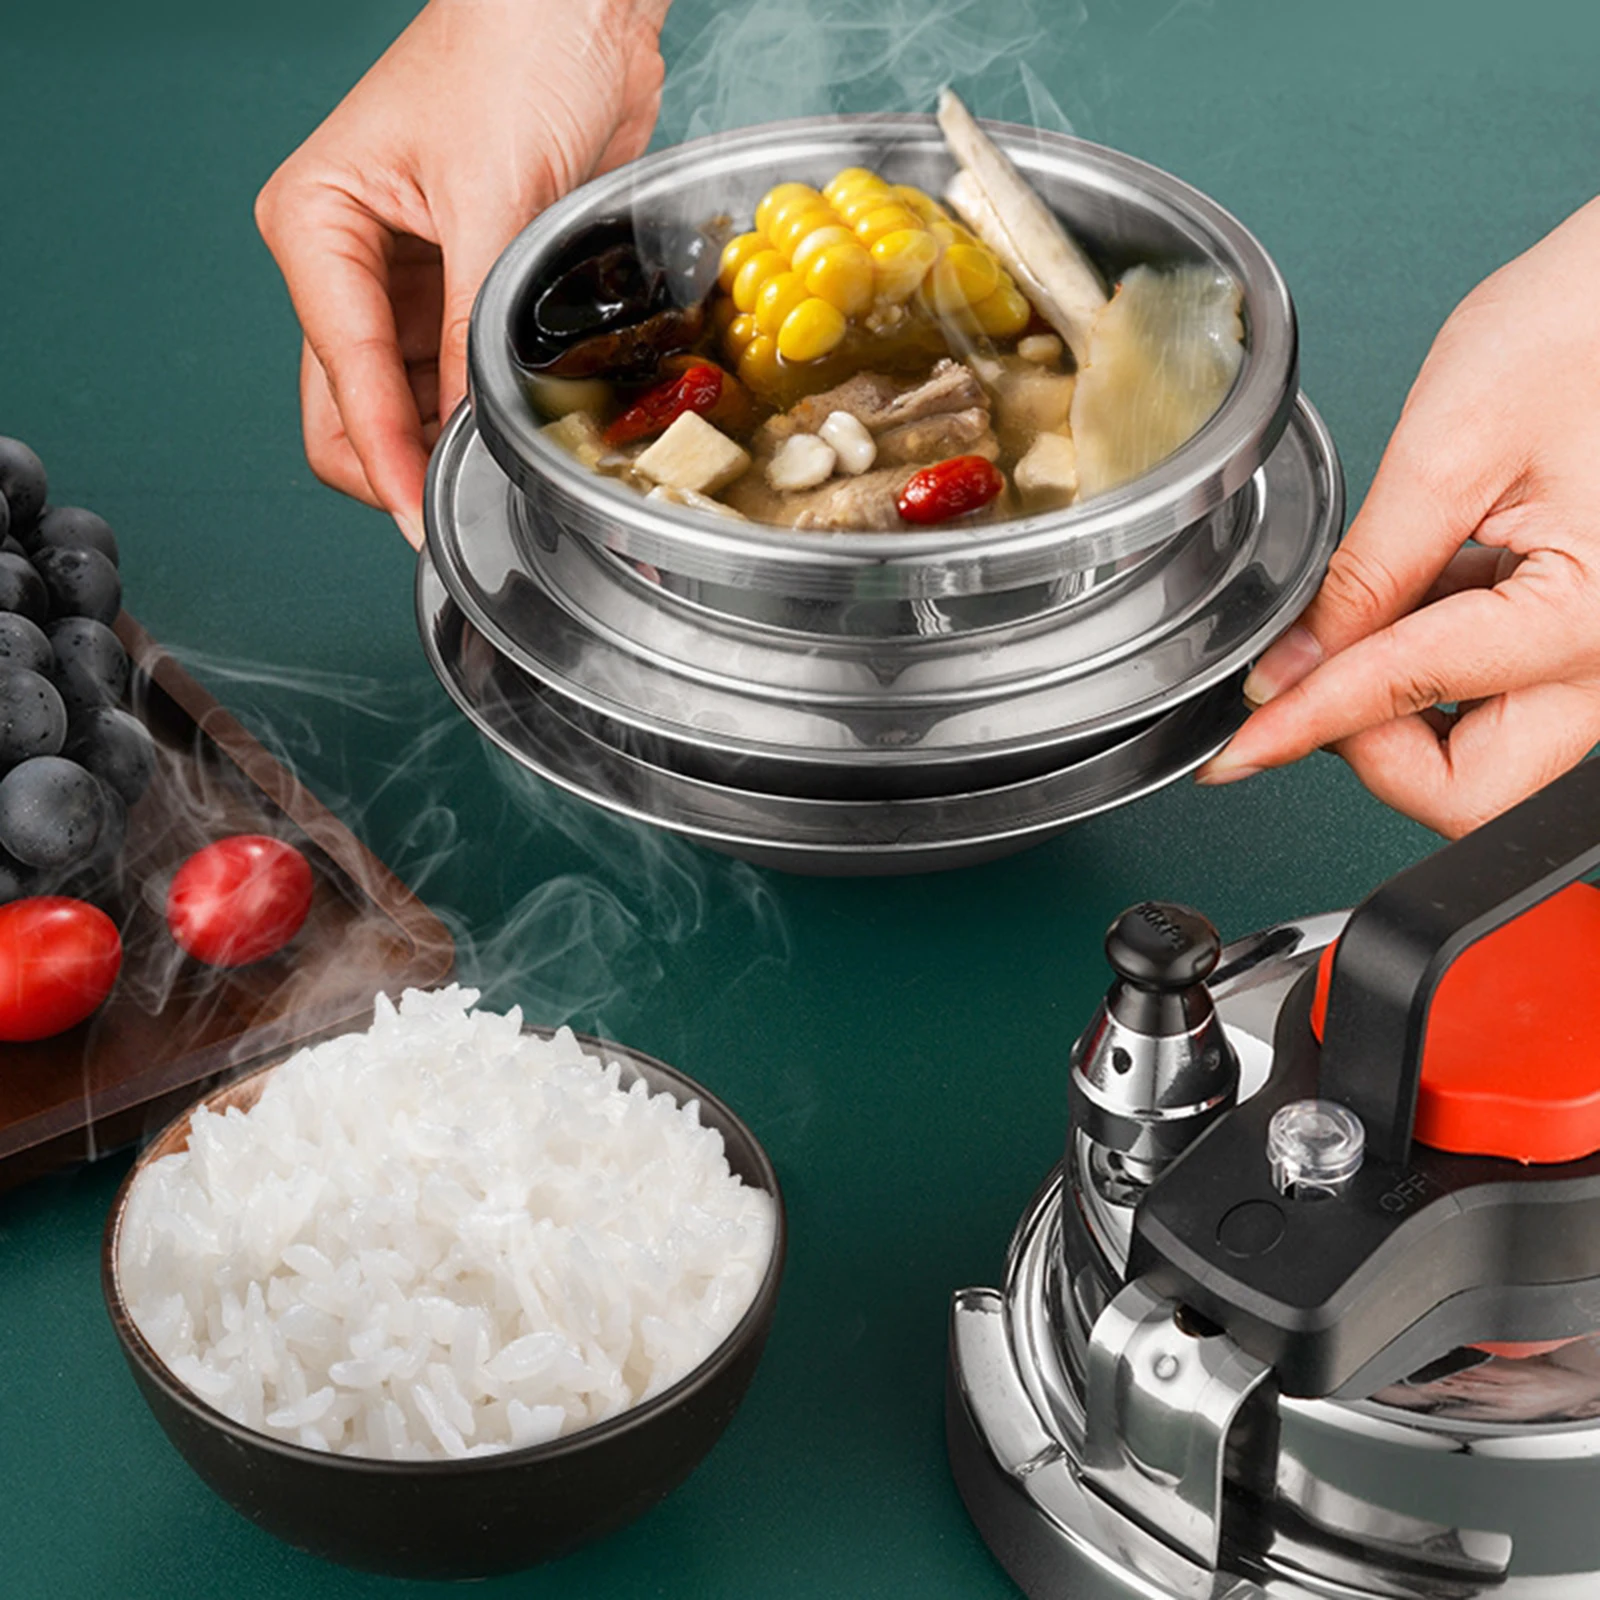 https://ae01.alicdn.com/kf/S97f77c2b51874e2b94dbb9d1387de4ebx/304-Stainless-Steel-Outdoor-Camping-Portable-Micro-Pressure-Cooker-Household-Mini-Pressure-Cooker-5-minute-Quick.jpg